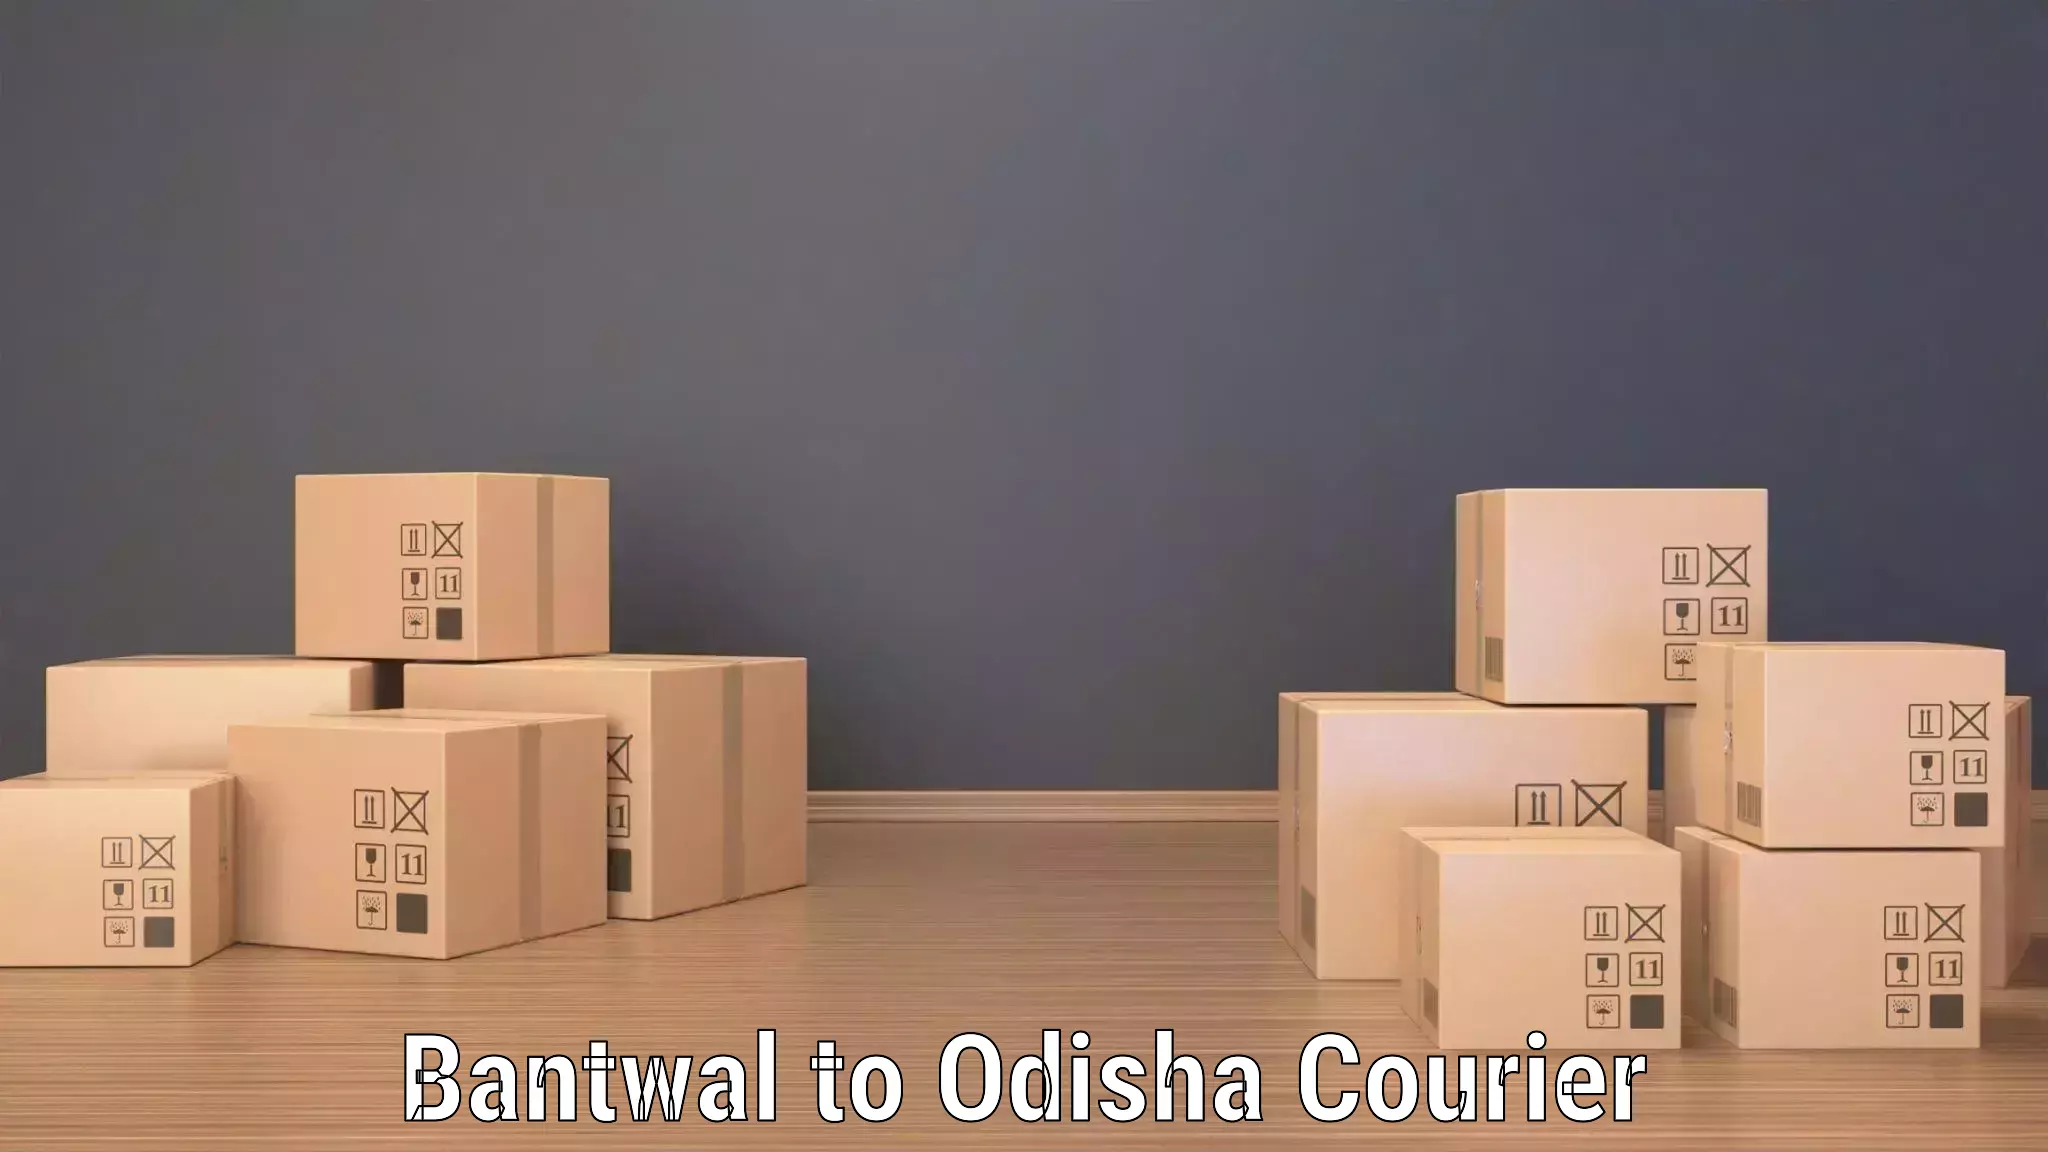 Courier membership in Bantwal to Chandinchowk